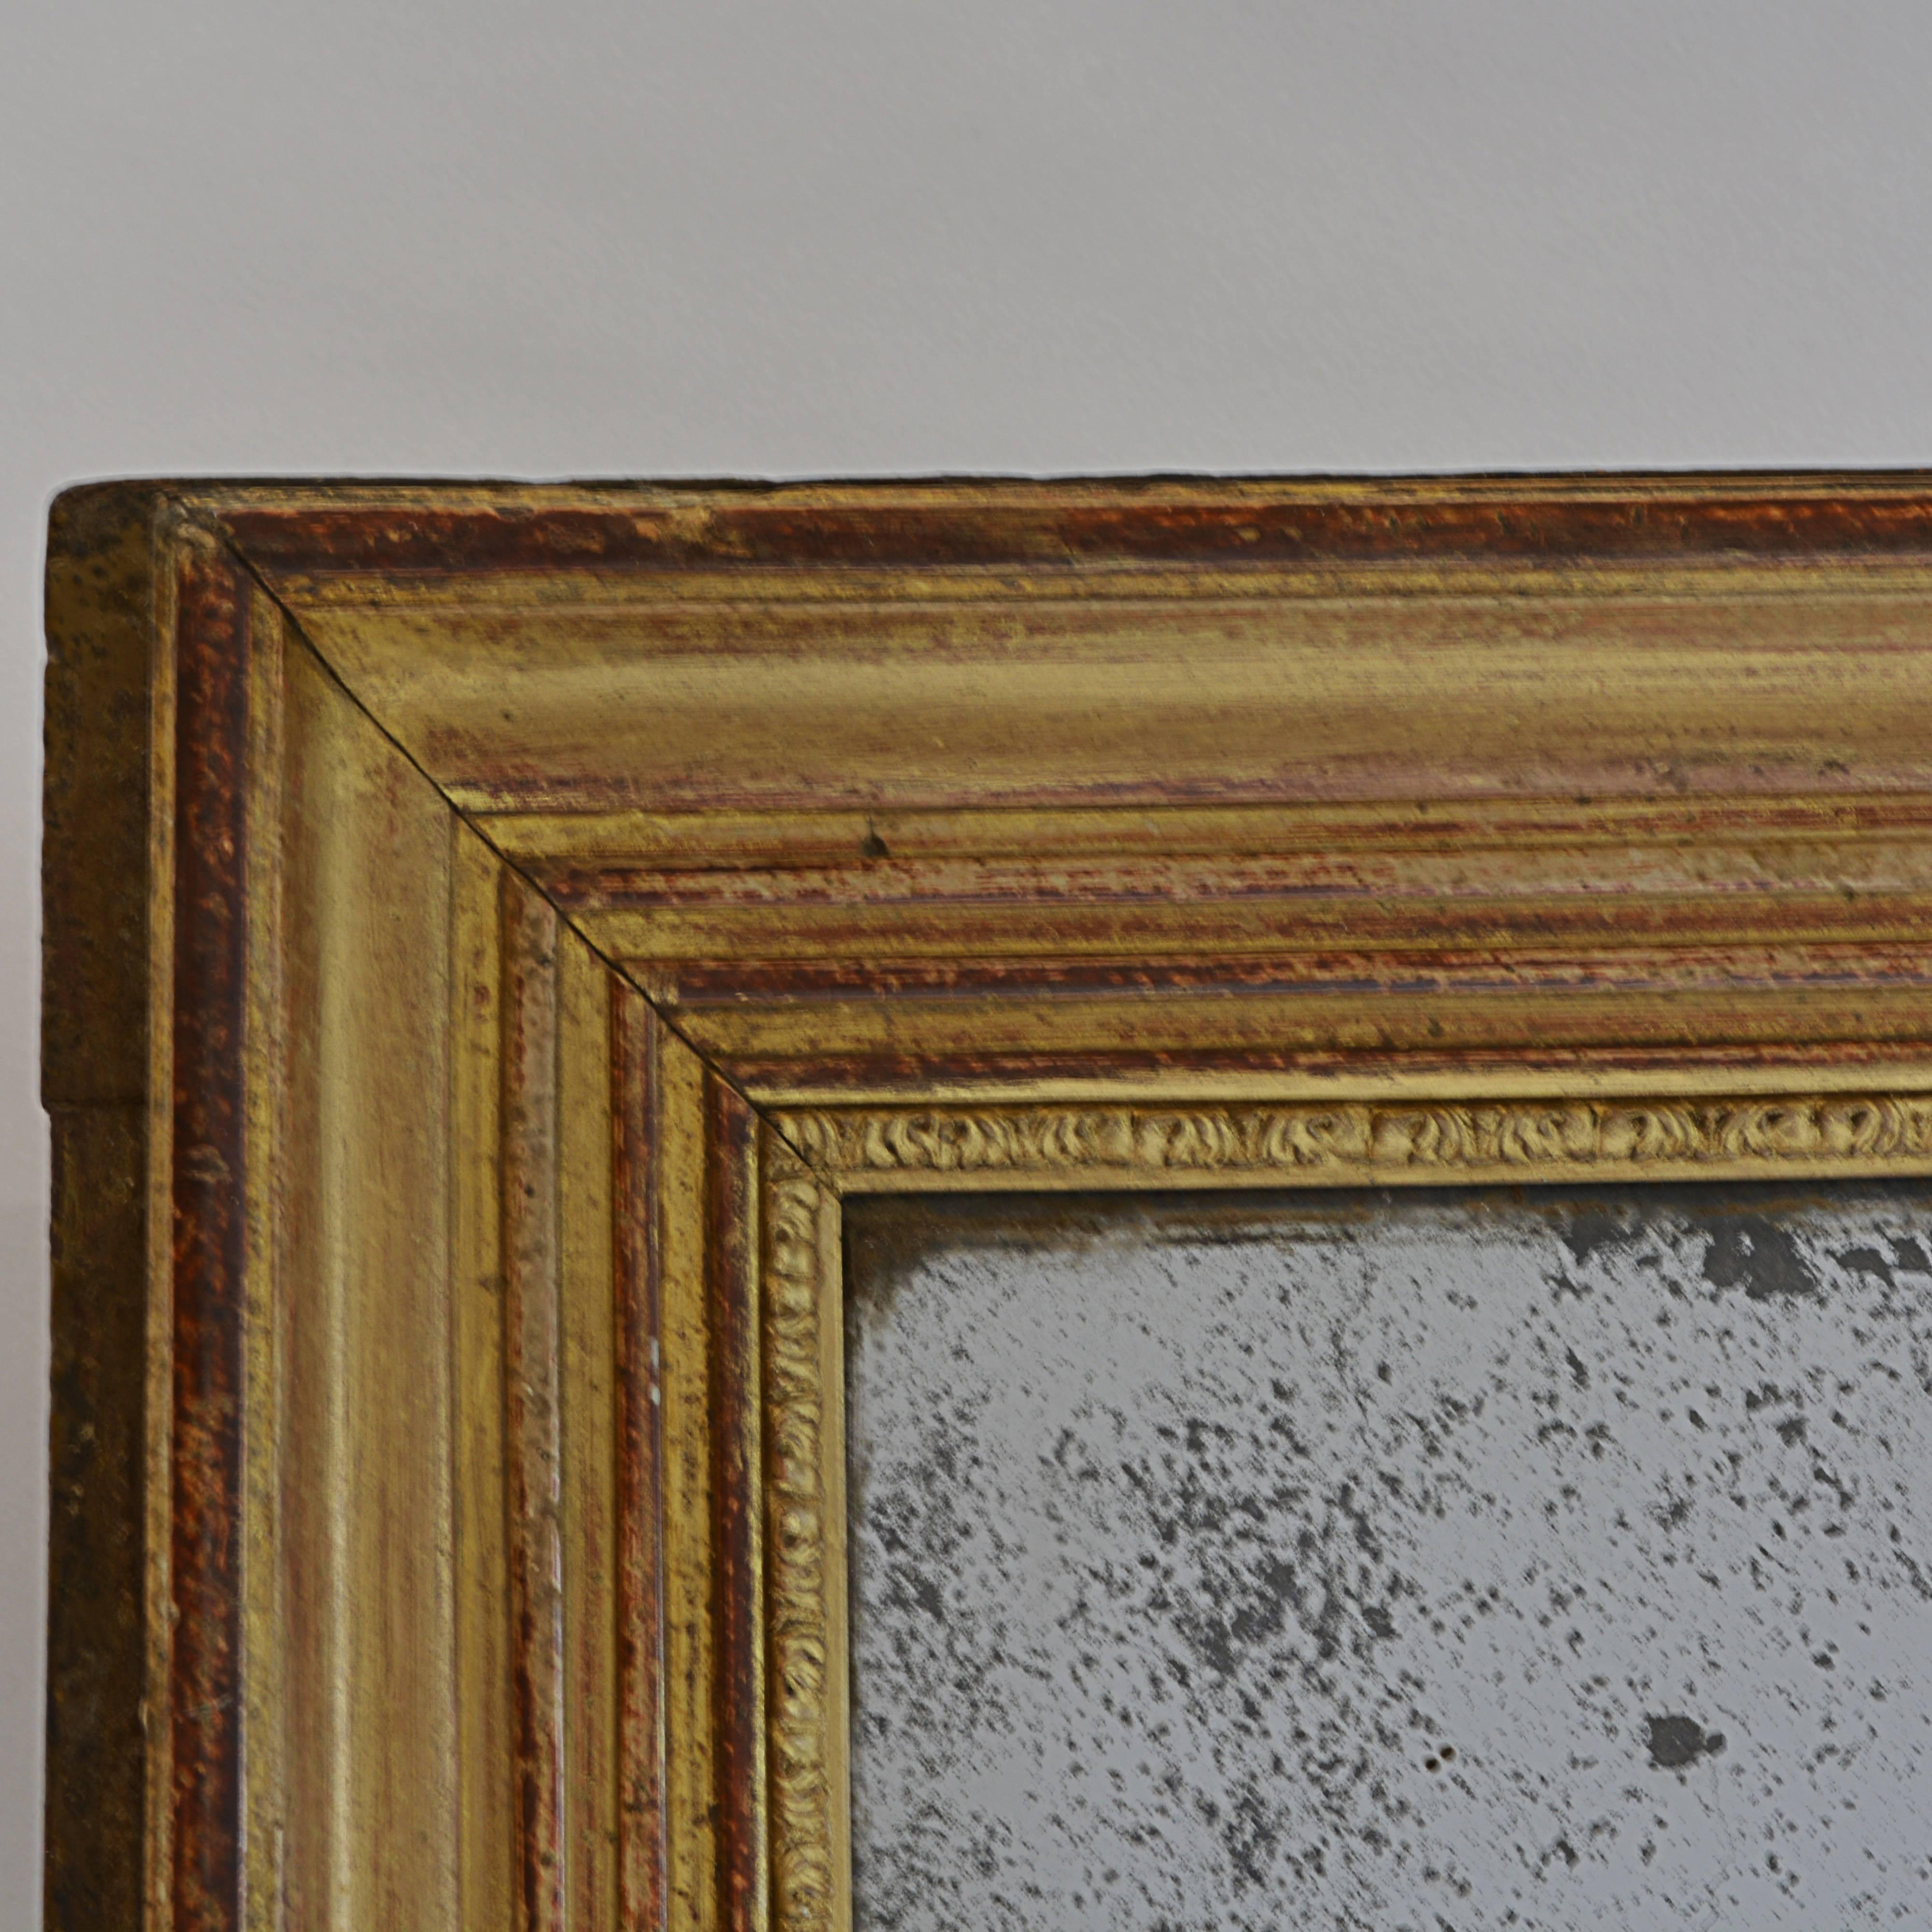 This might have been an unassuming hallway mirror in an upscale home when it was new, back around 1860. Today, though, it's a poignant link to a time long past. We find it especially desirable due to the condition of its gold-painted wooden frame